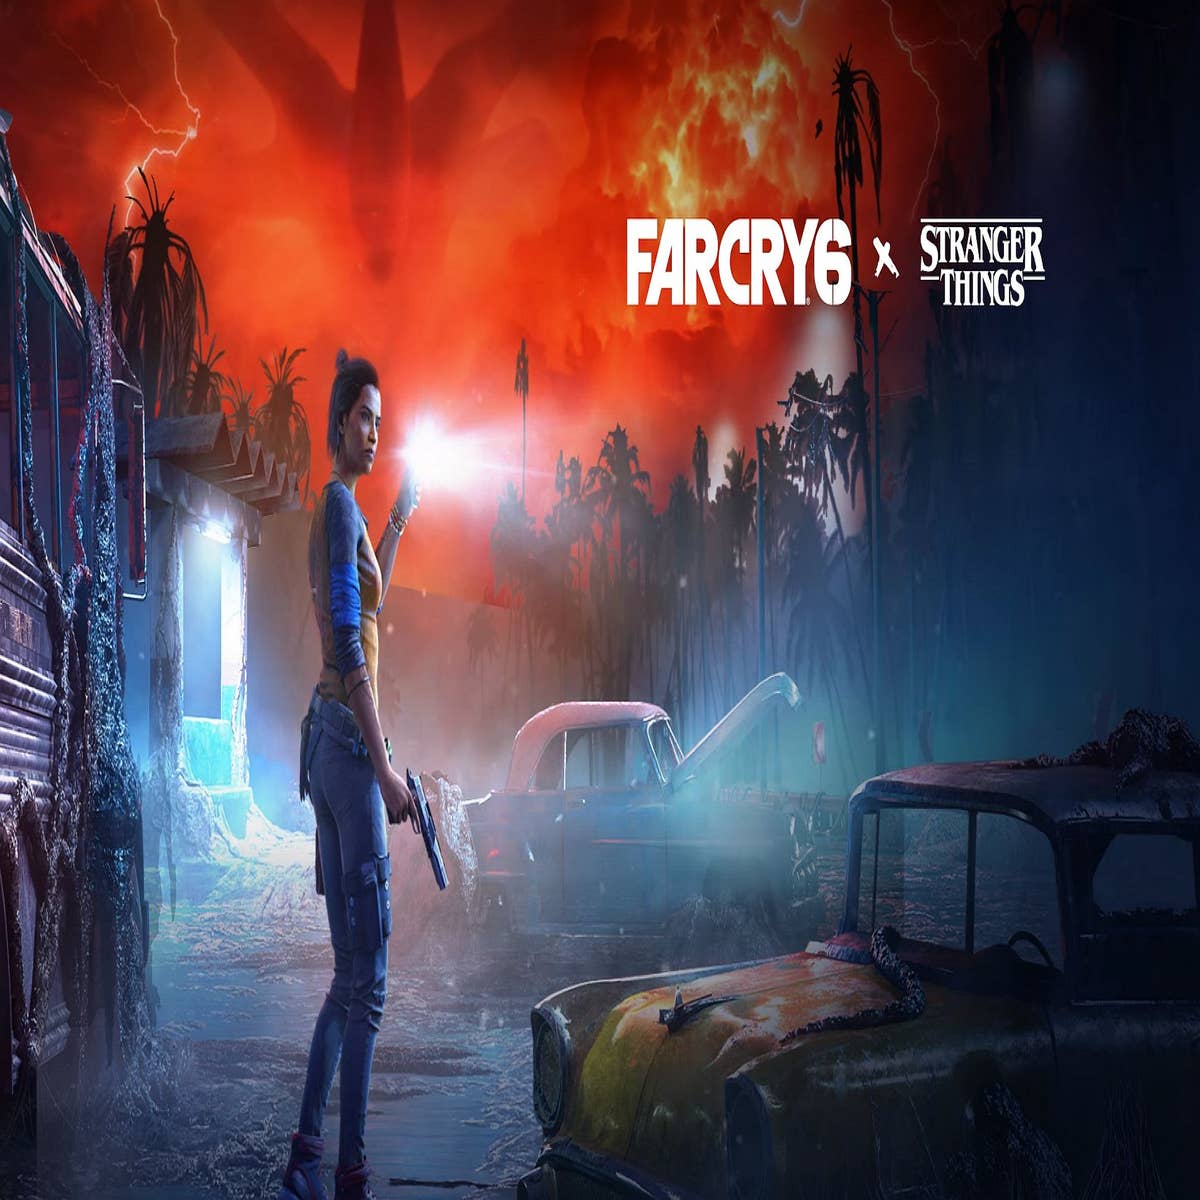 Far Cry 6 play free all weekend begins, along with a Stranger Things  crossover